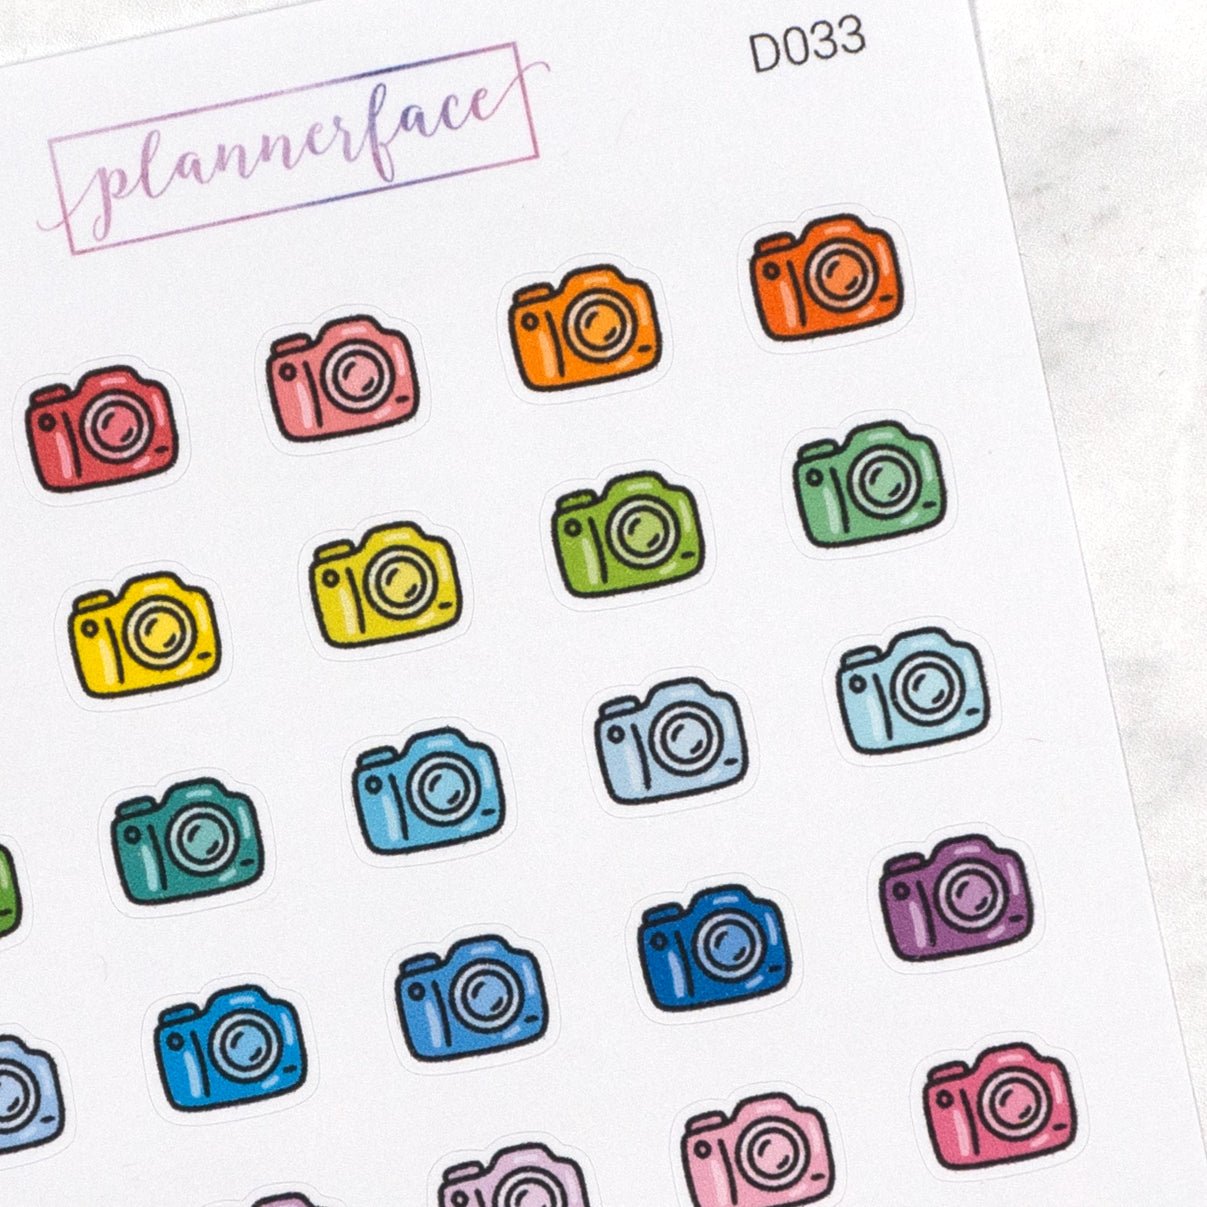 Camera Multicolour Doodles by Plannerface